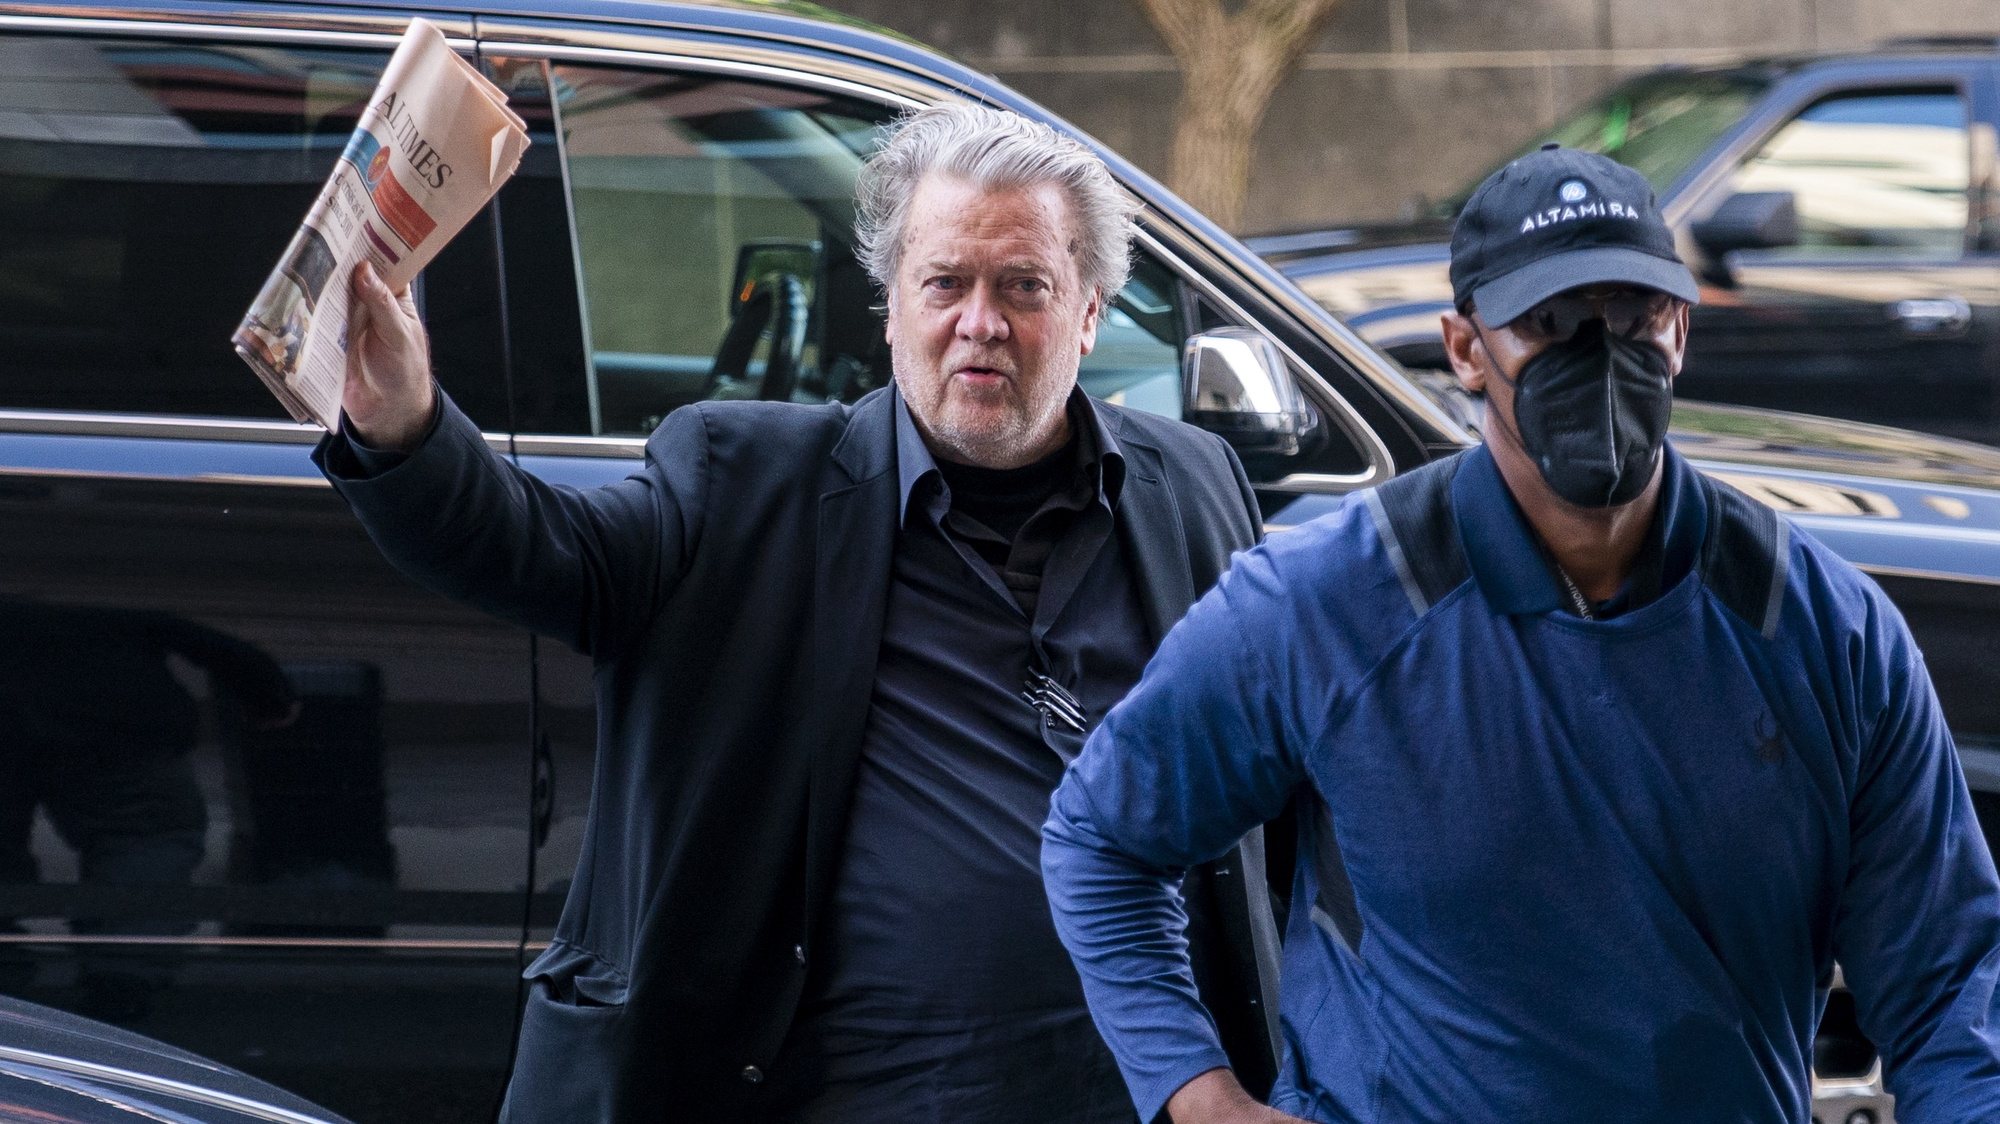 epa10086246 Steve Bannon (L), former advisor to President Trump, arrives at the Federal Courthouse in Washington, DC, USA, 22 July 2022. Bannon faces two criminal charges for his failure to comply with subpoenas from the House Select Committee to Investigate the January 6 Attack on the Capitol.  EPA/SHAWN THEW